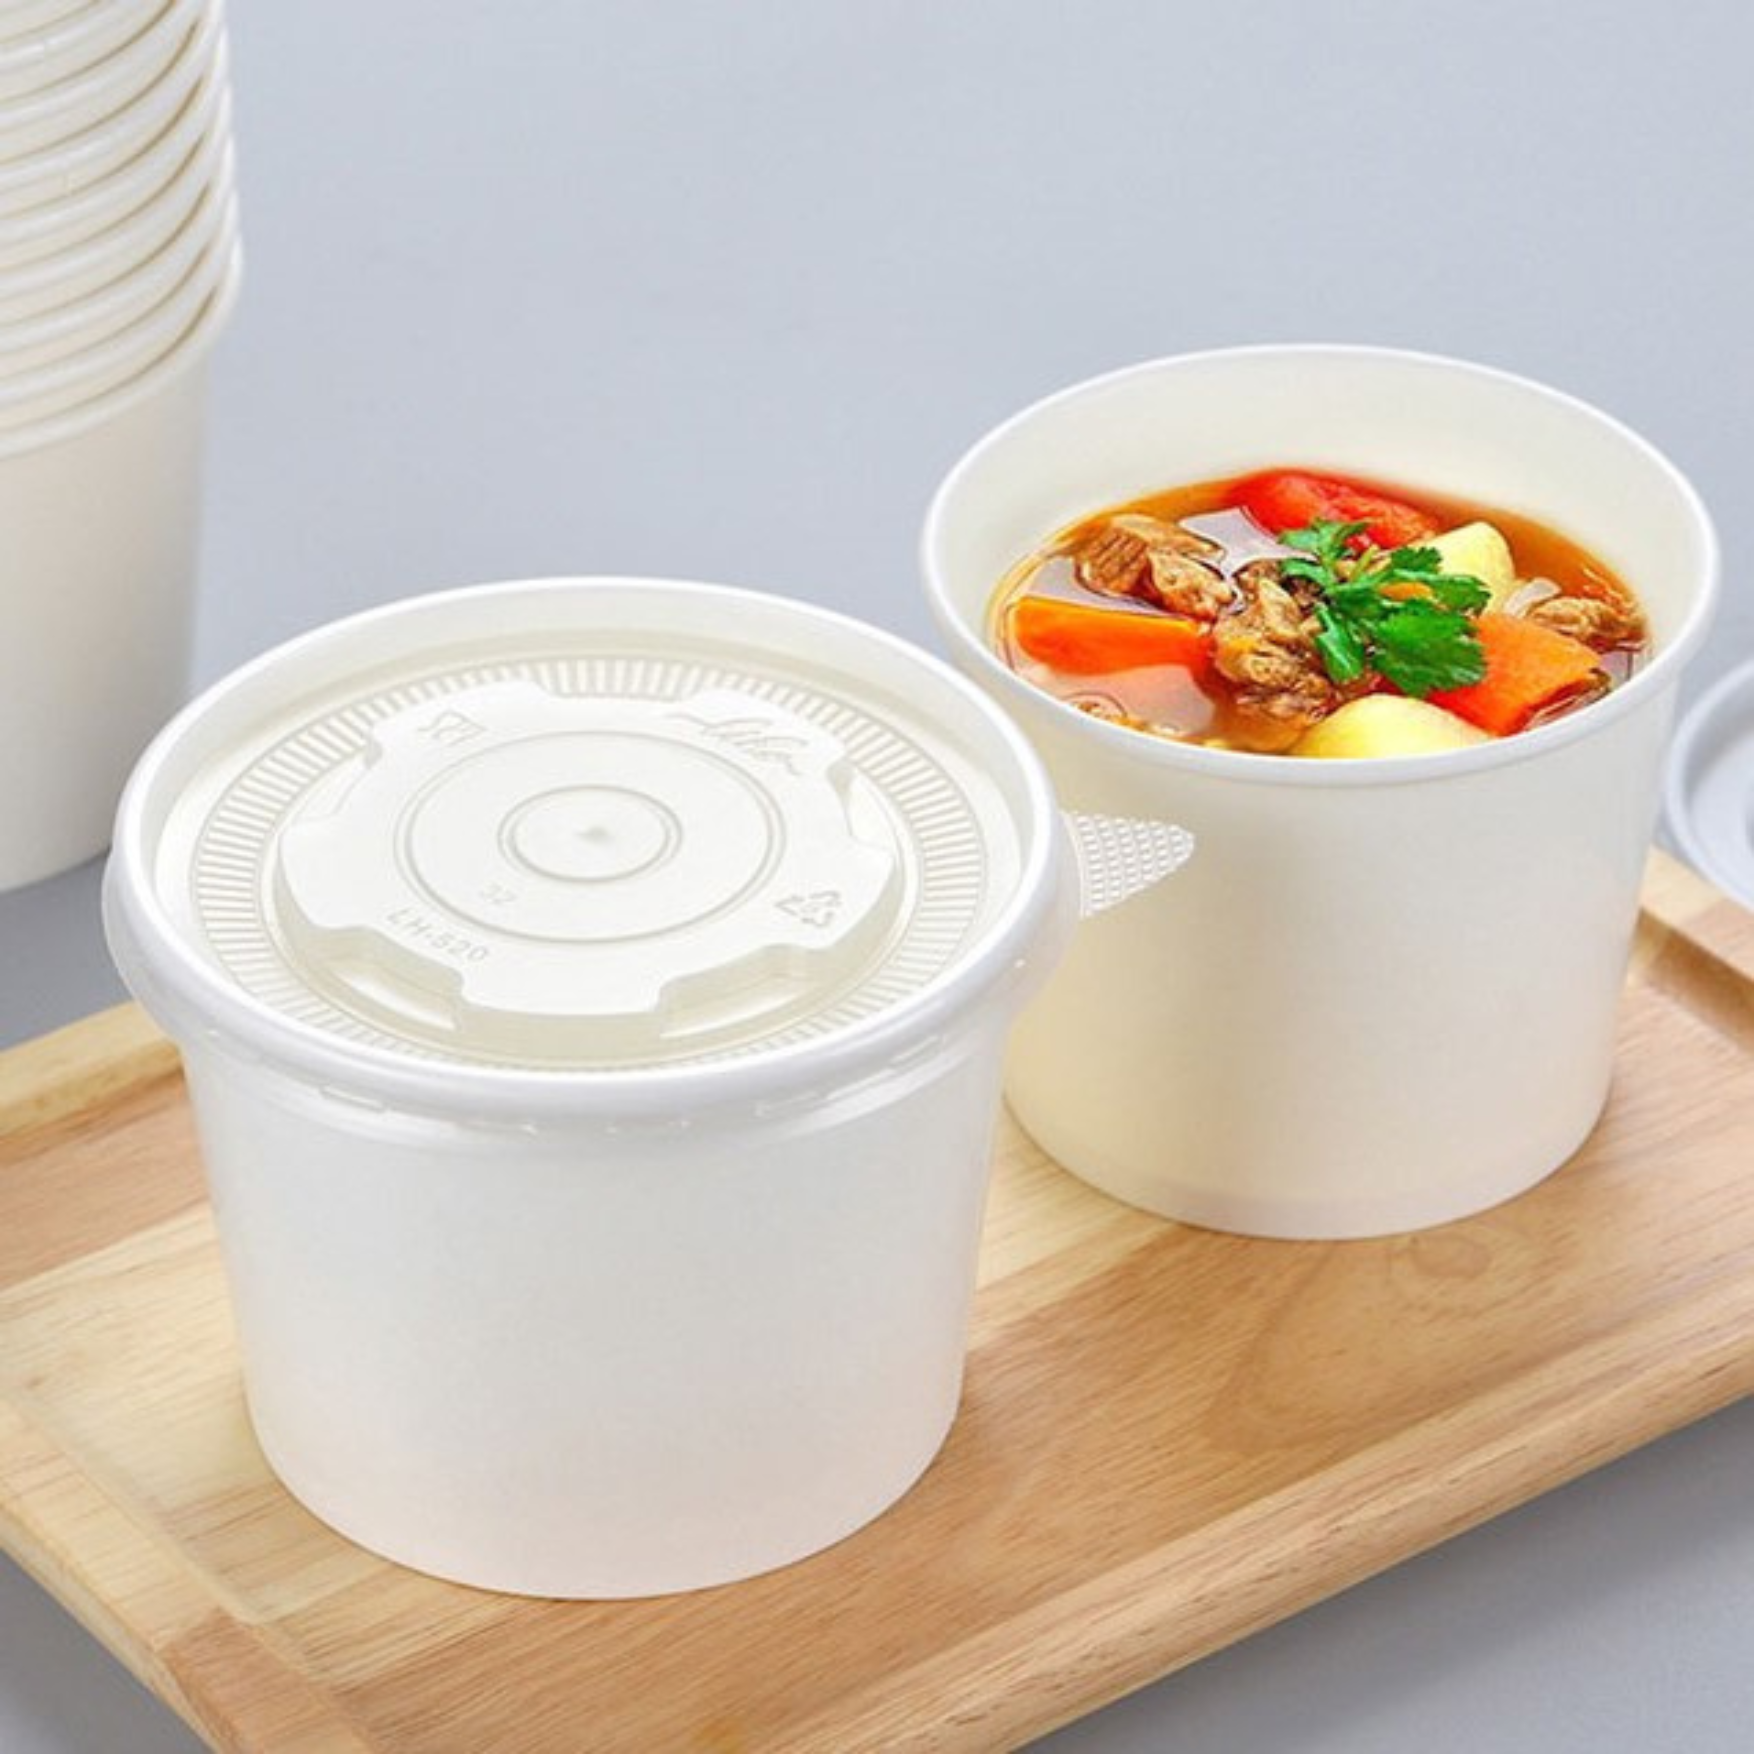 Paper Soup Container: The Sustainable Take-Out Packaging Solution, by  KimEcopak